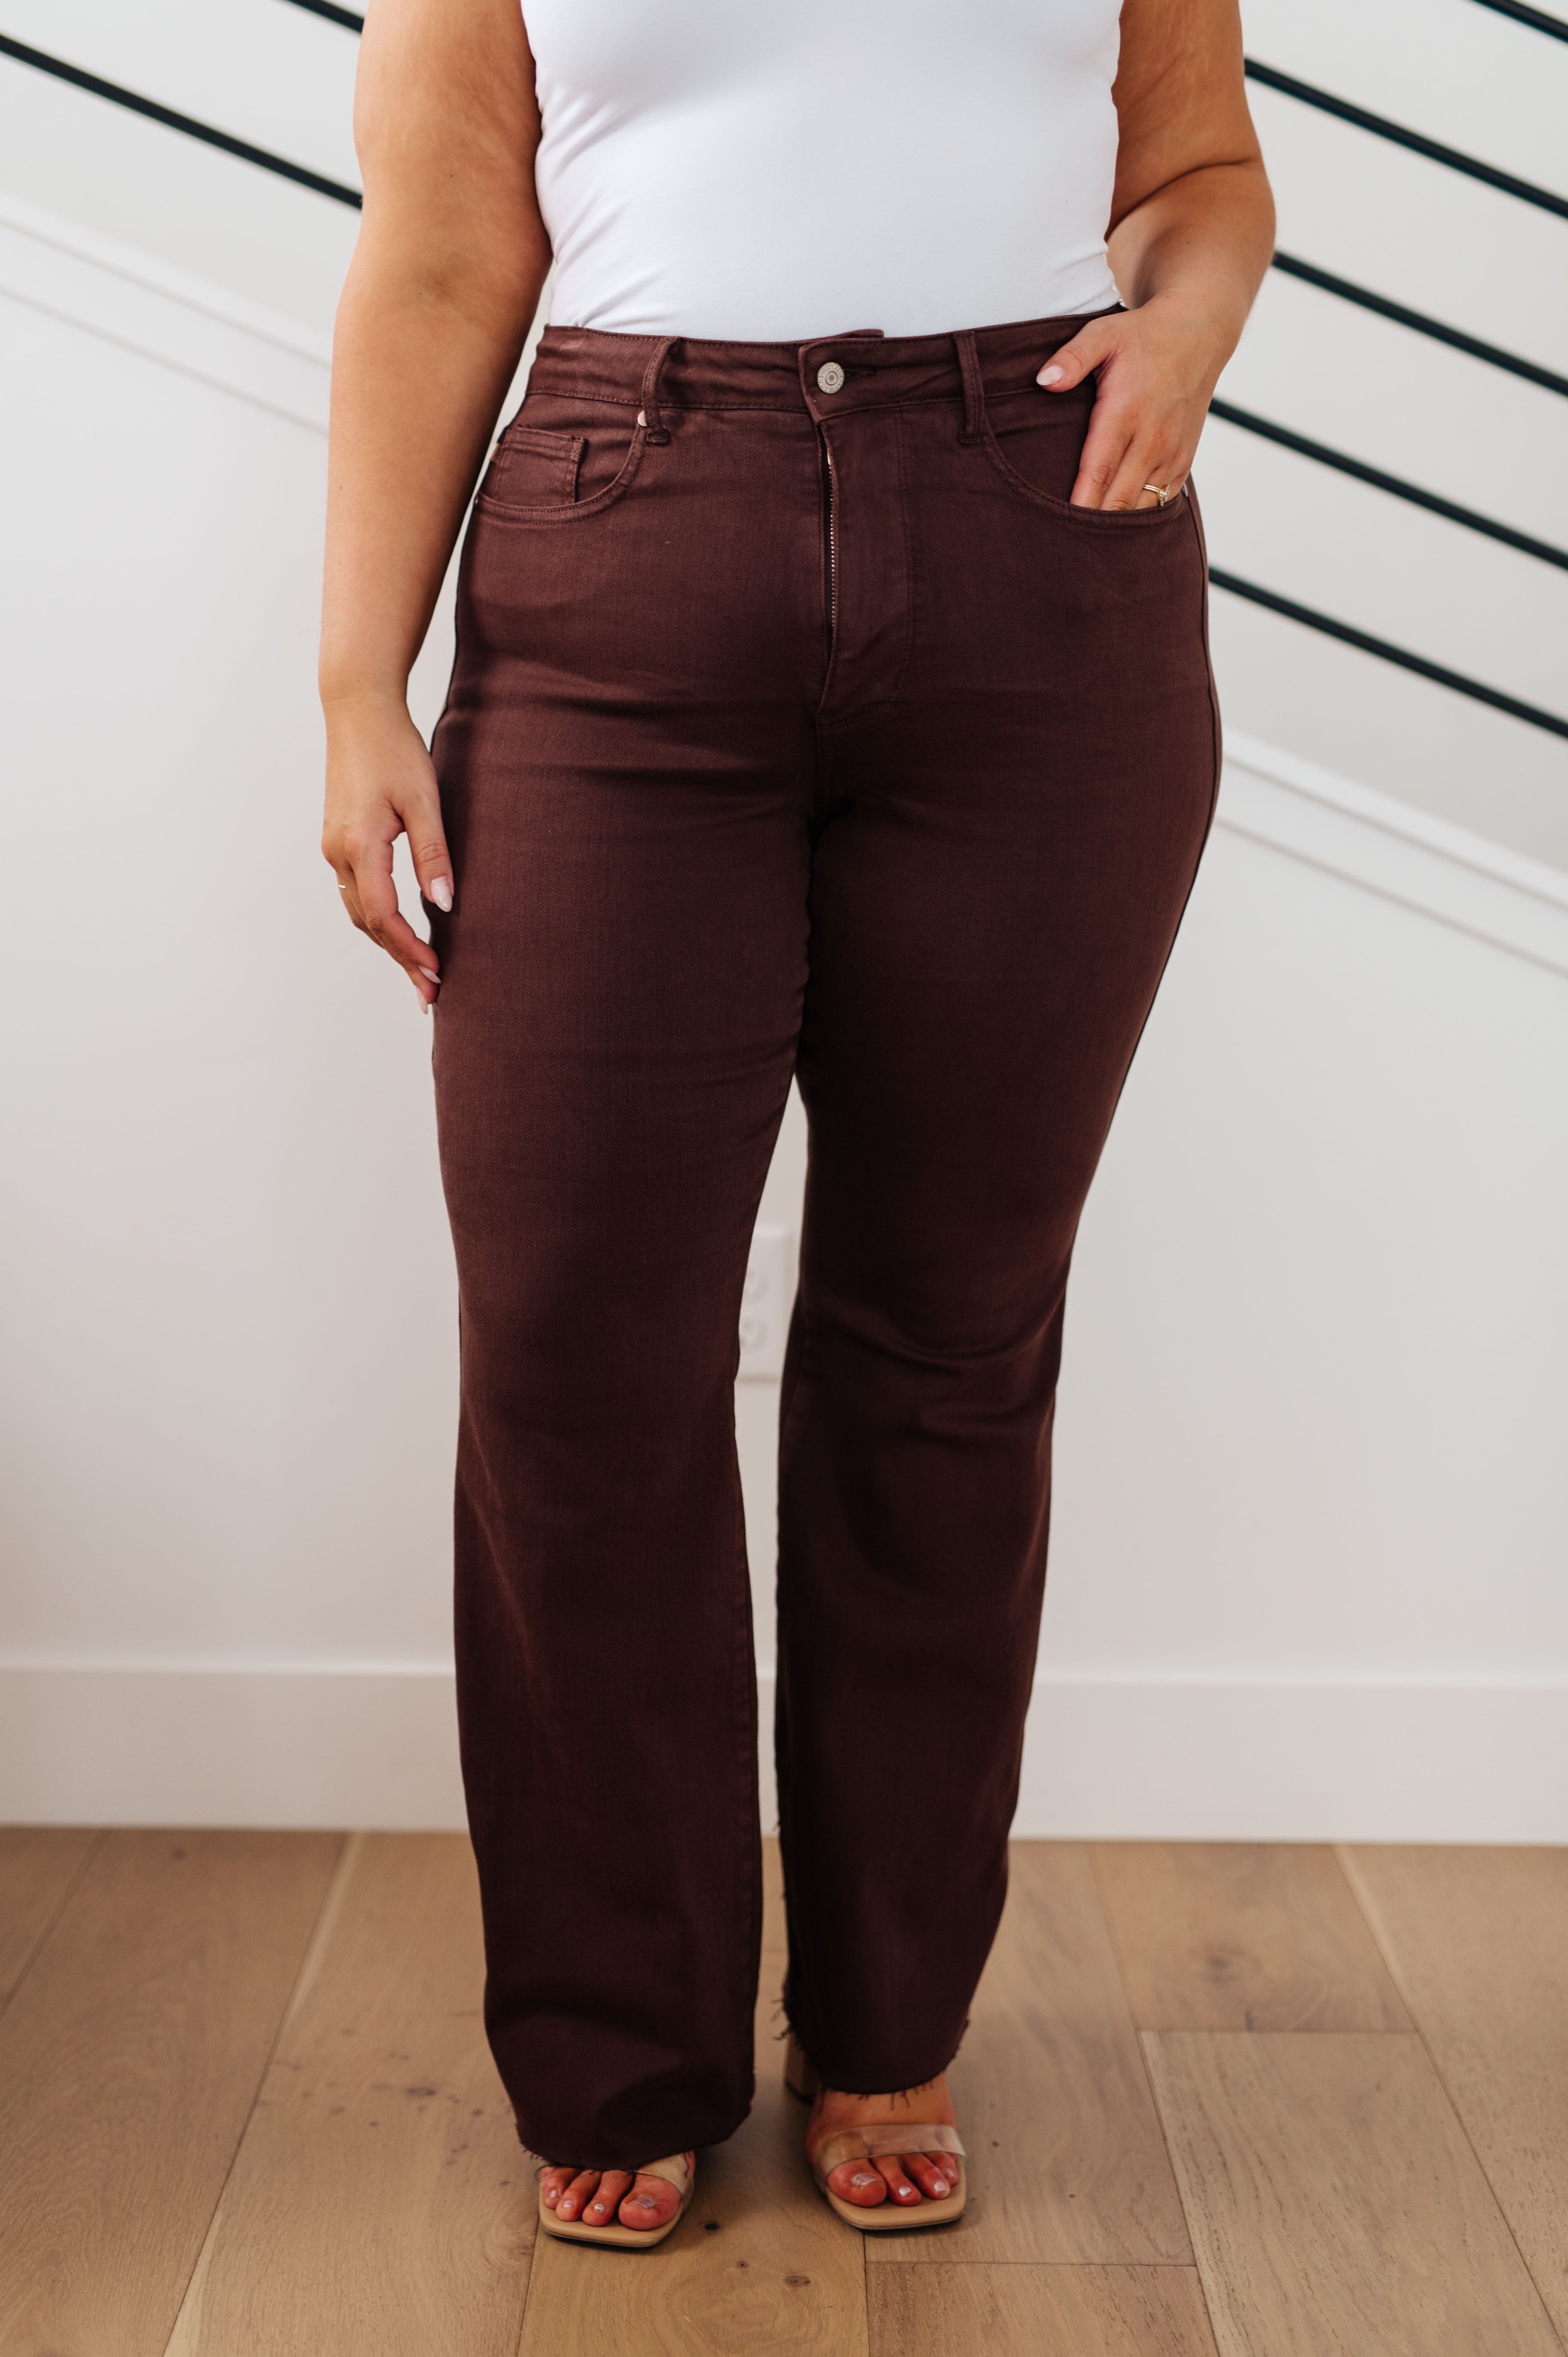 Judy Blue Sienna High Rise Control Top Flare Jeans in Espresso - Lola Cerina Boutique